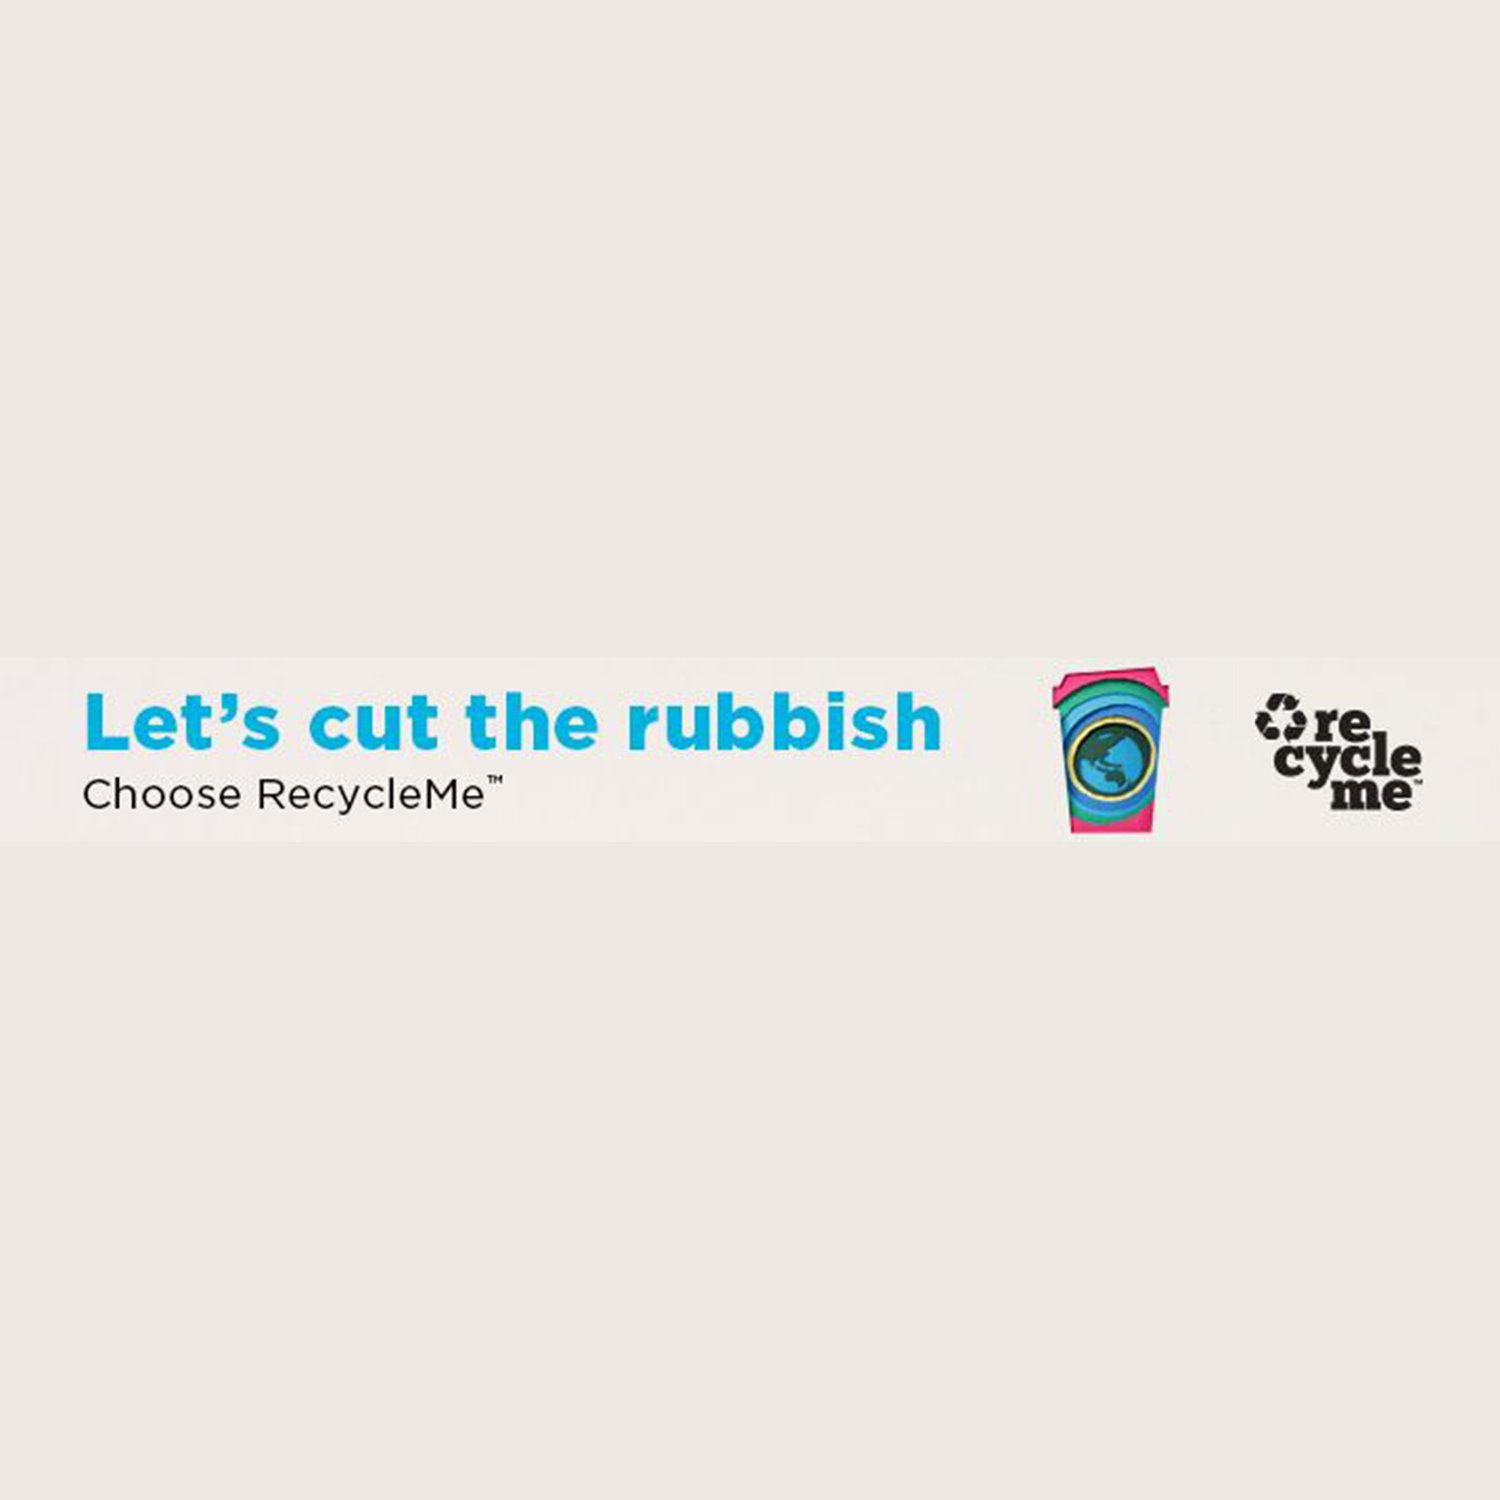 Image of Cut the Rubbish cup with text Let's Cut the Rubbish